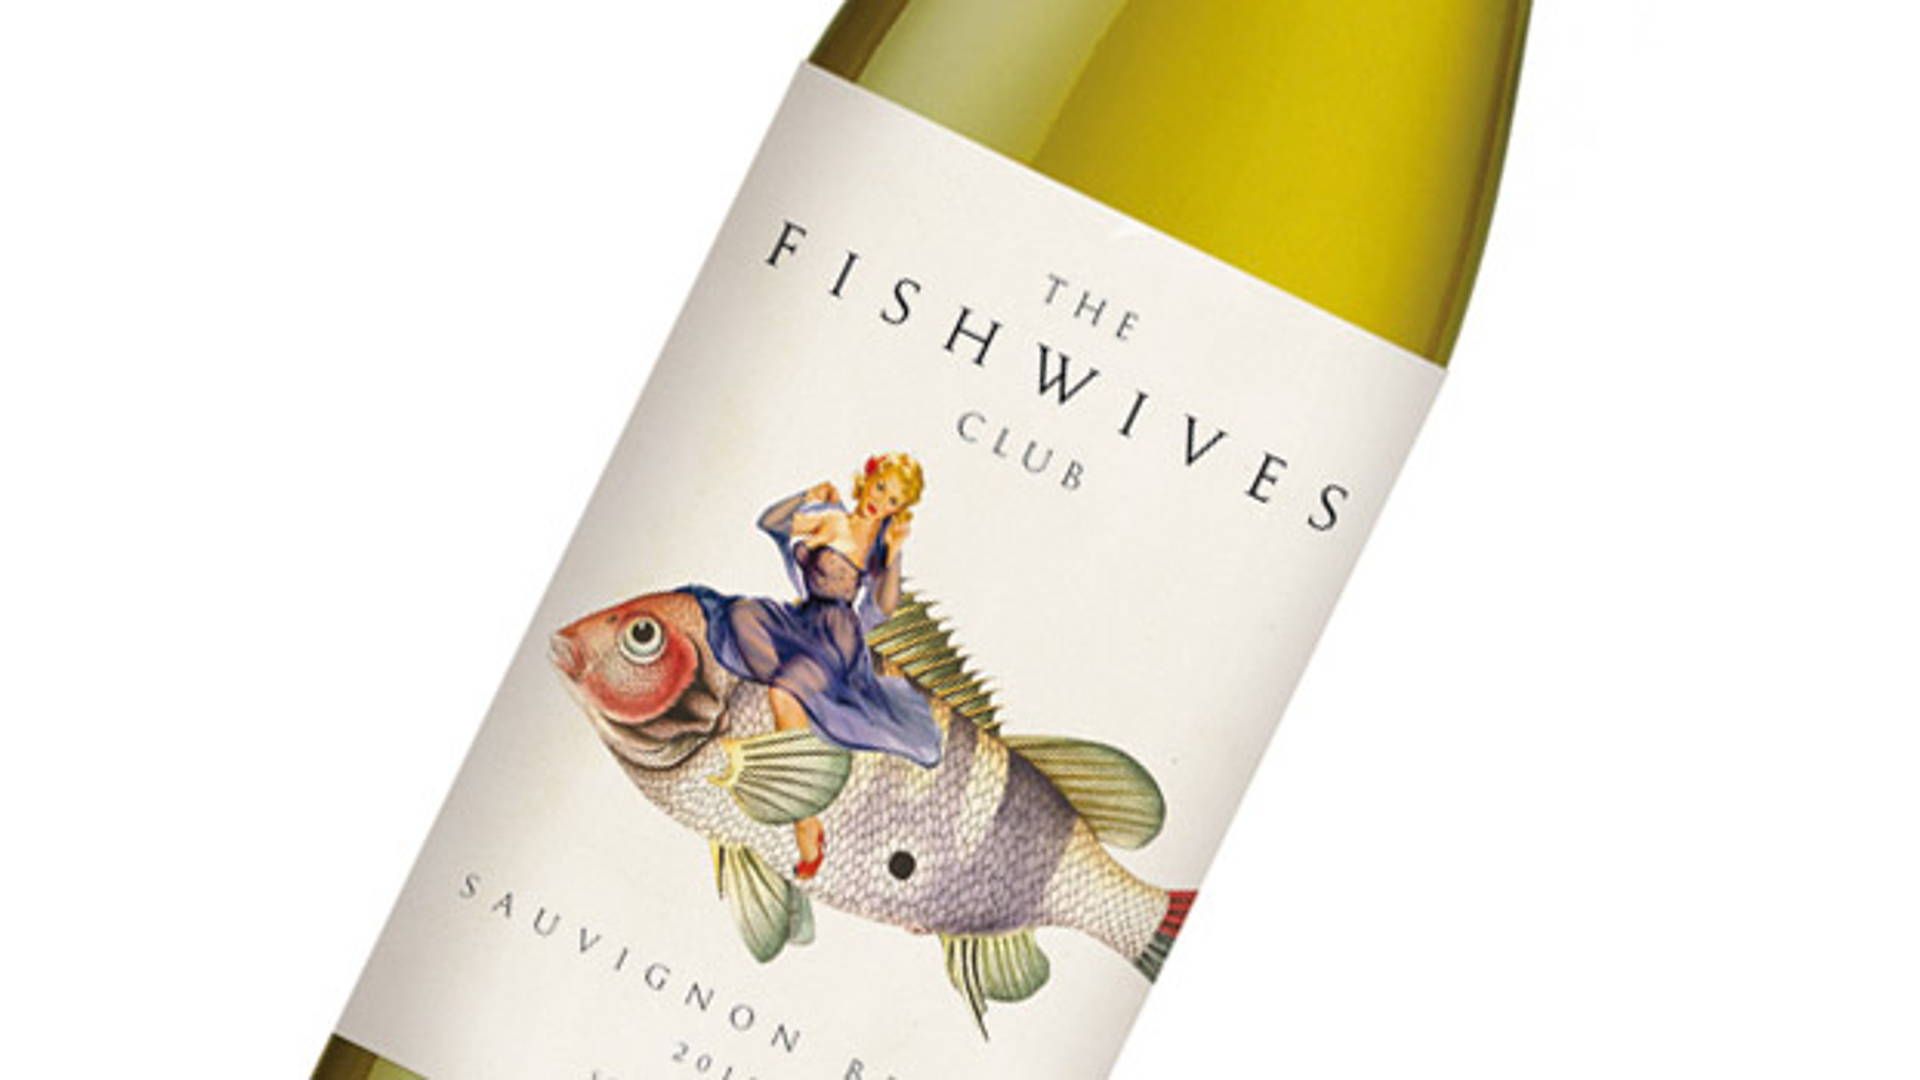 Featured image for Fishwives Club Wine Range